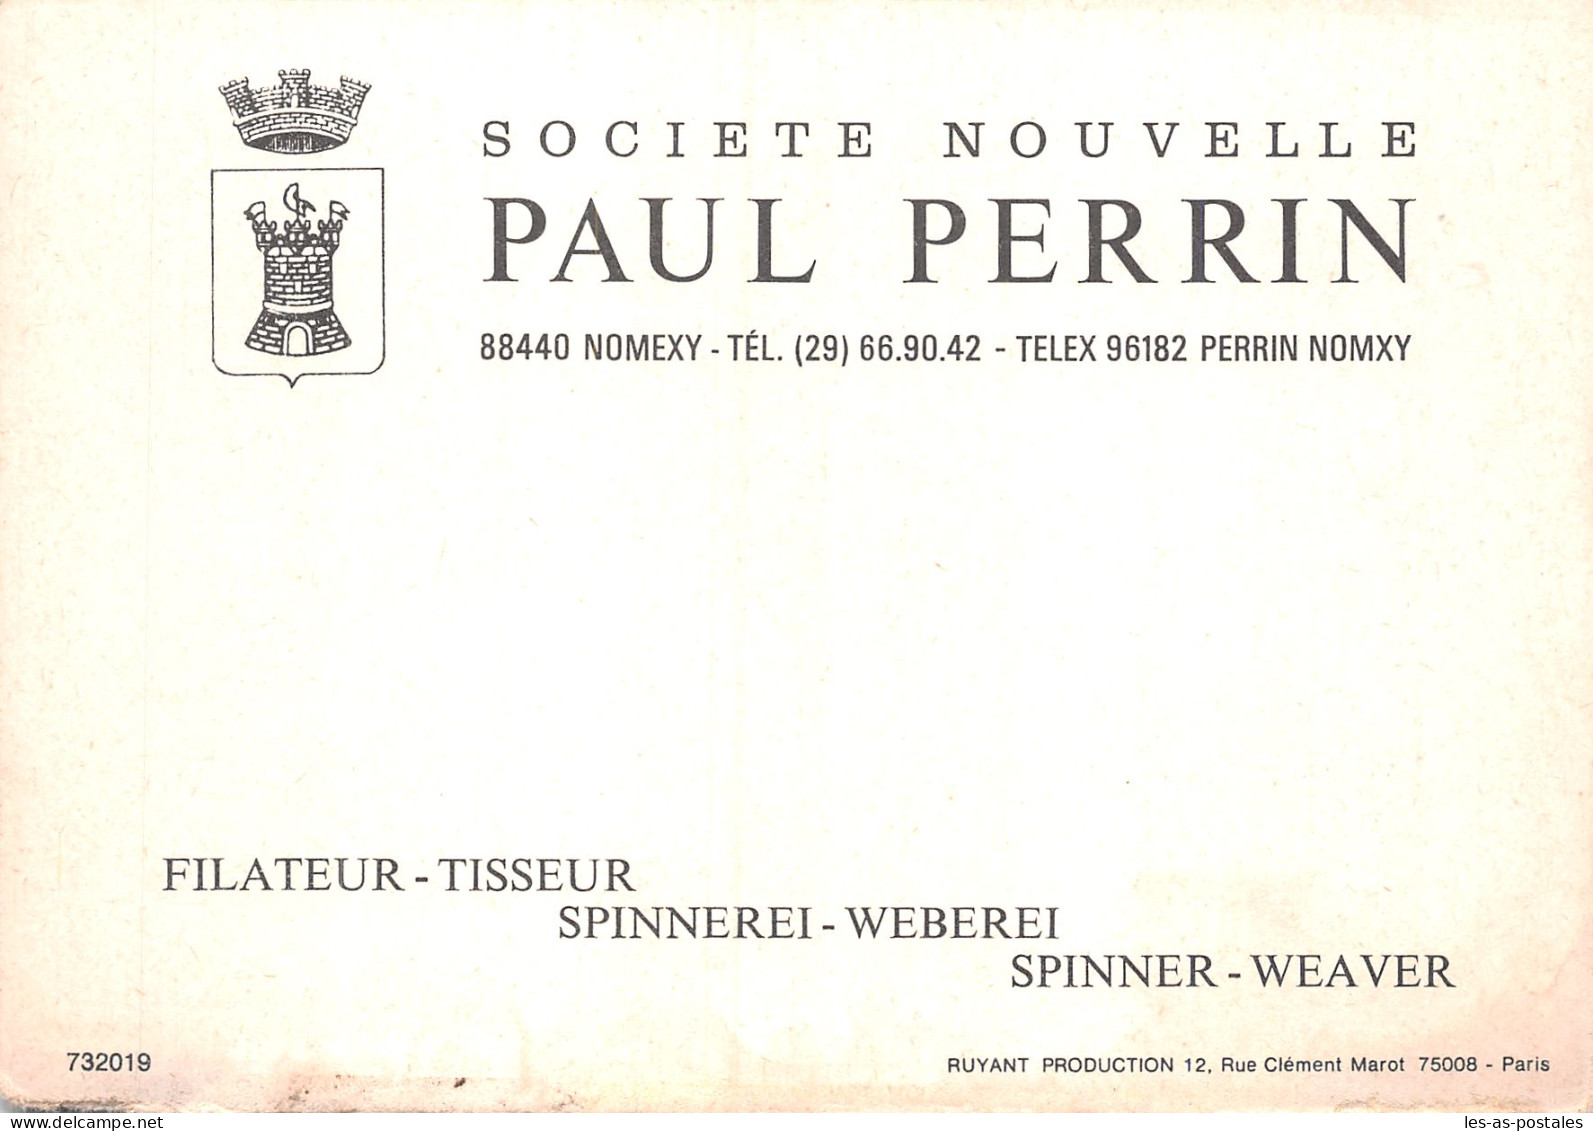 88 NOMEXY FILATEUR PAUL PERRIN - Nomexy